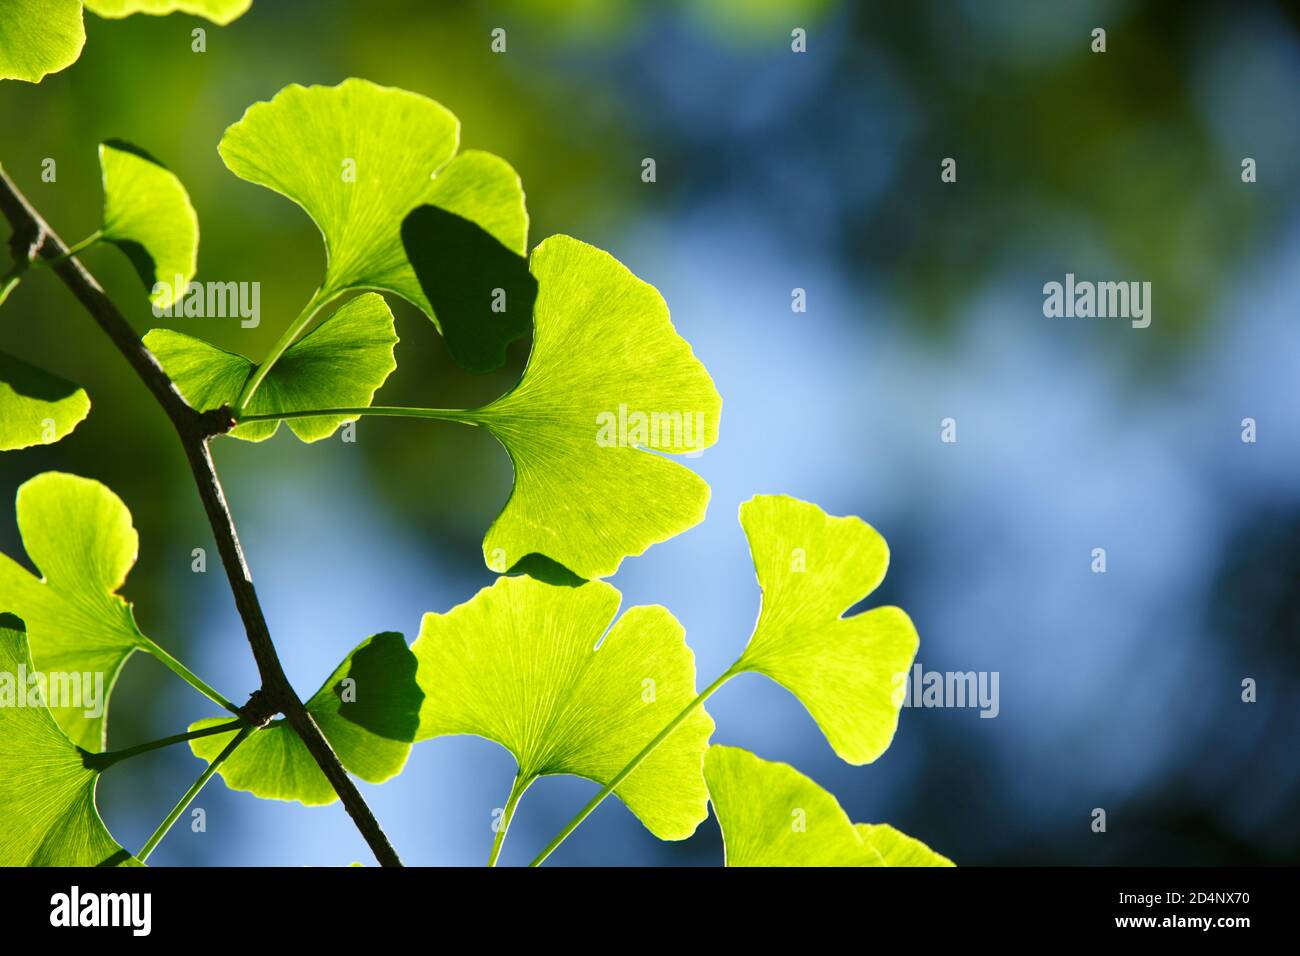 Ginkgo biloba tree. Young green leaves close up in bright contrasting lighting with a blurry background and blue sky Stock Photo